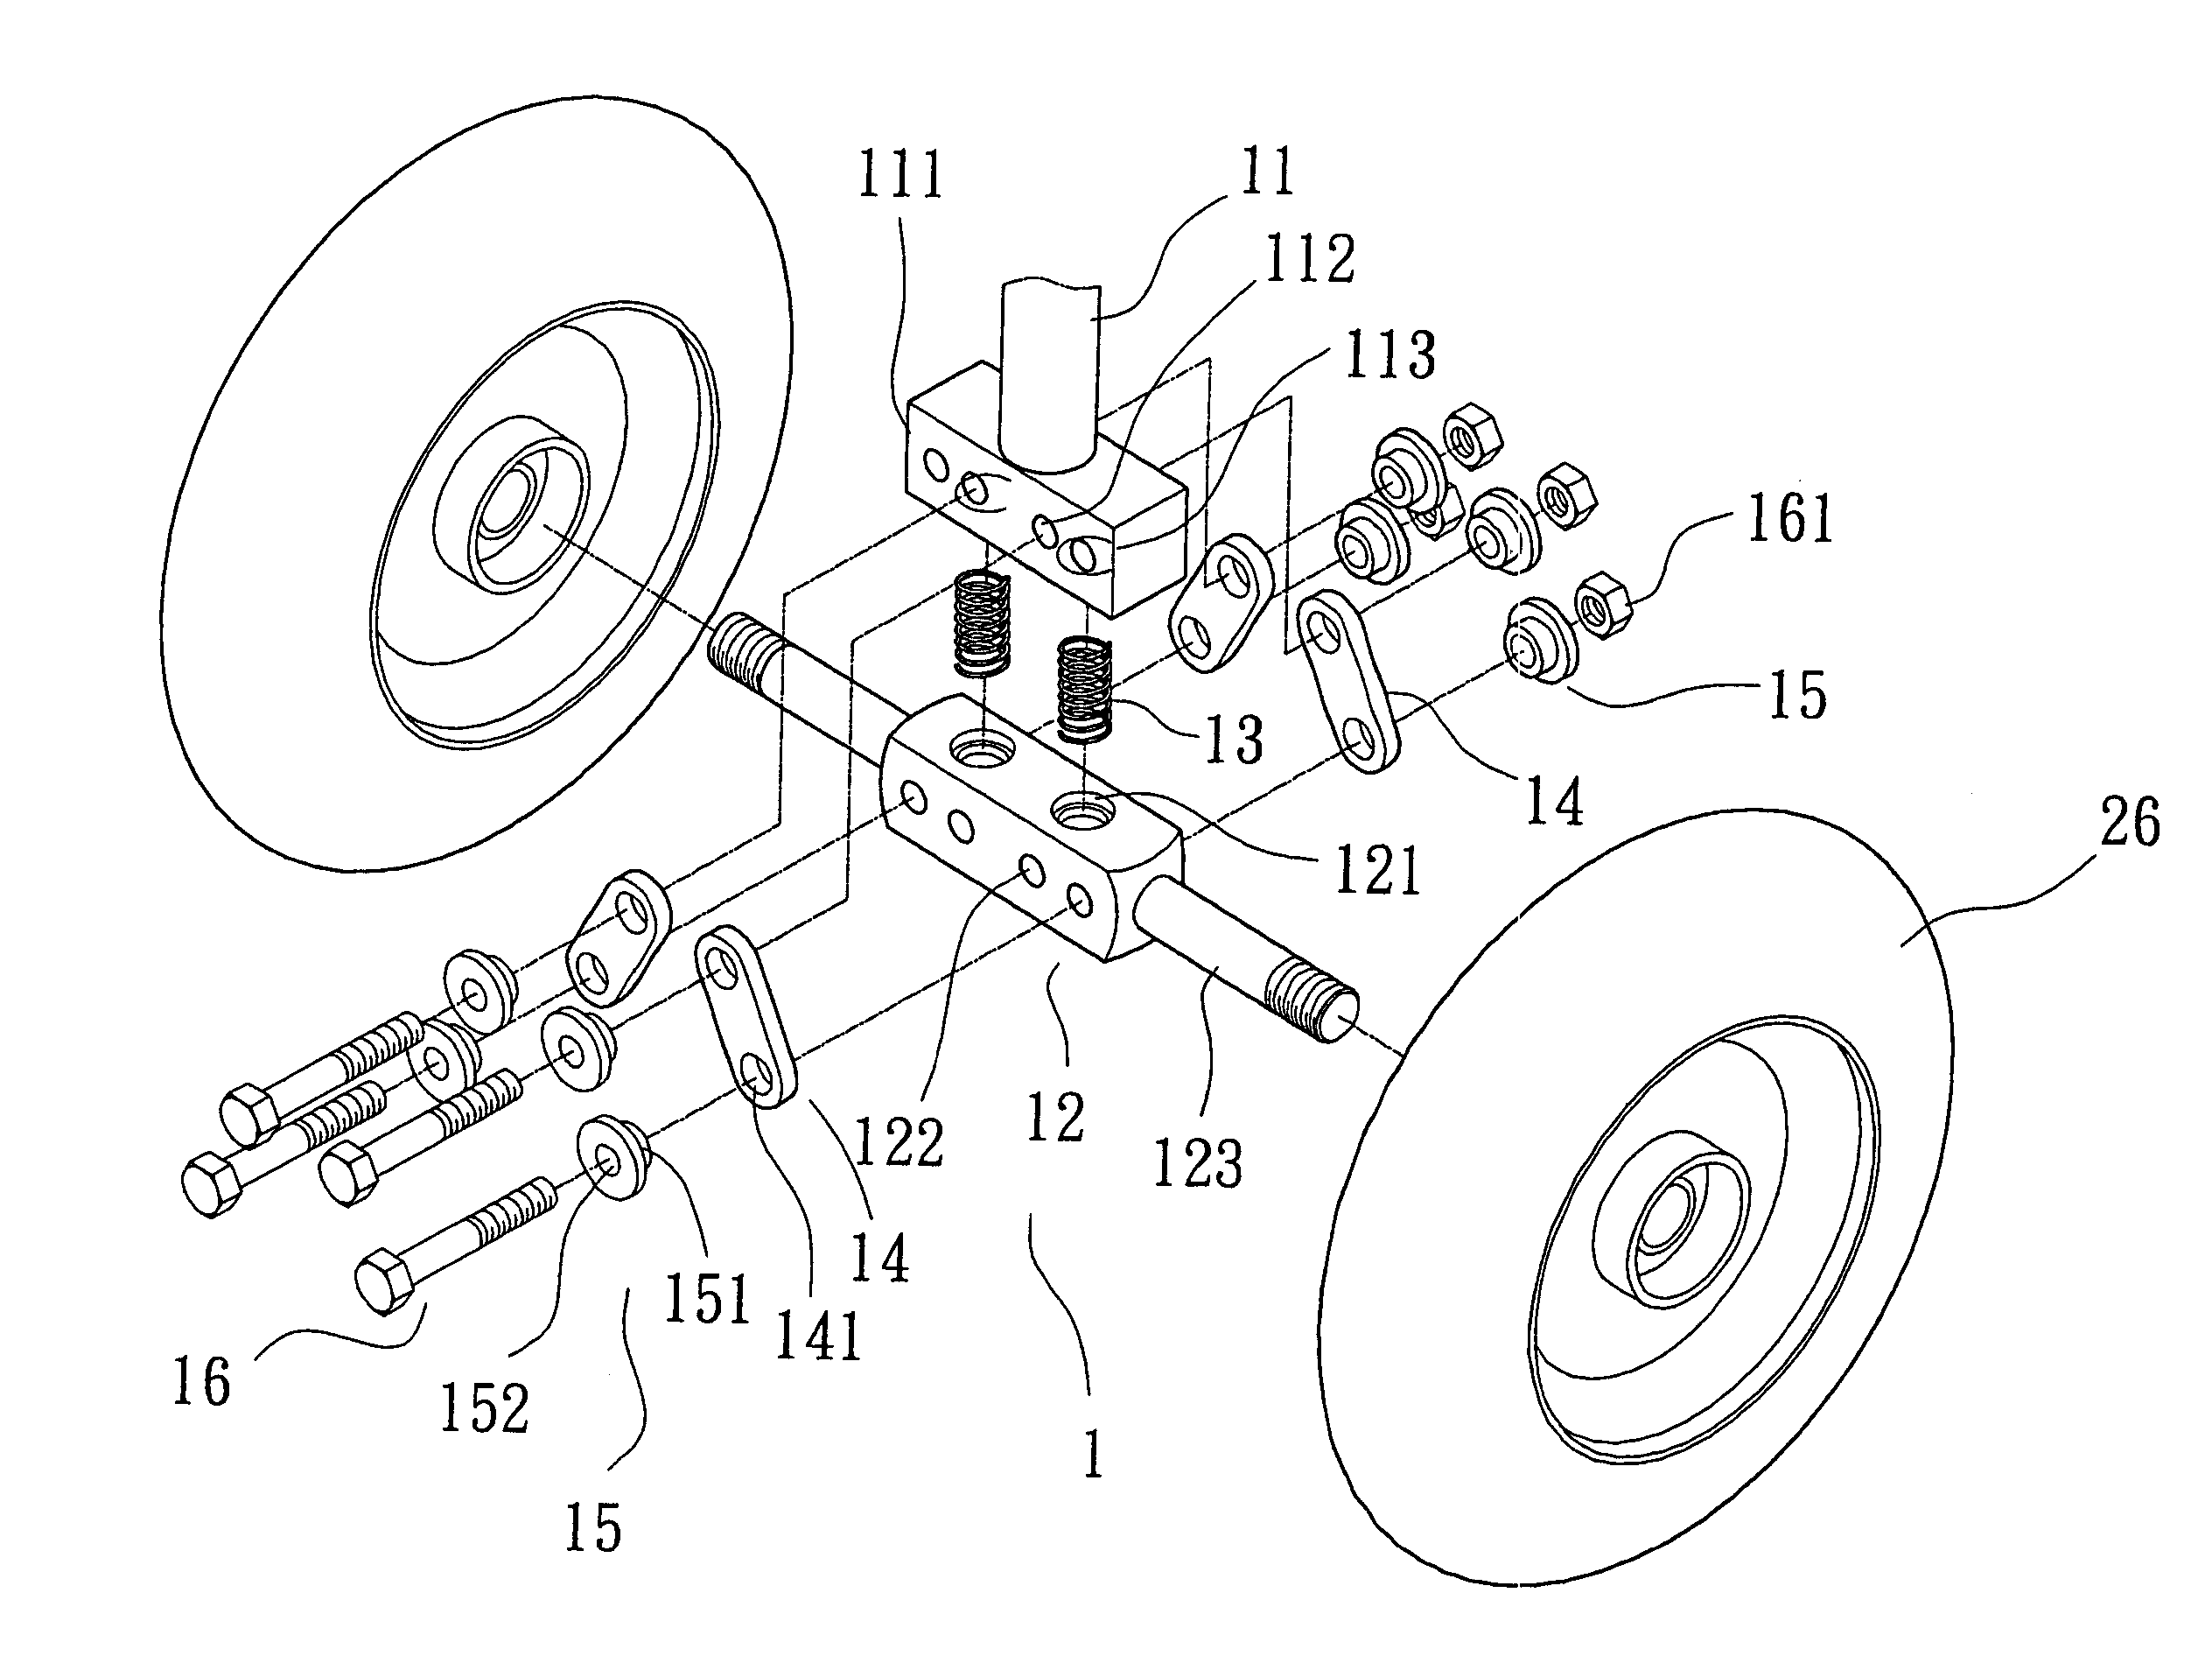 Shock absorbing structure of turning mechanism of an electric cart equipped with twin front wheels